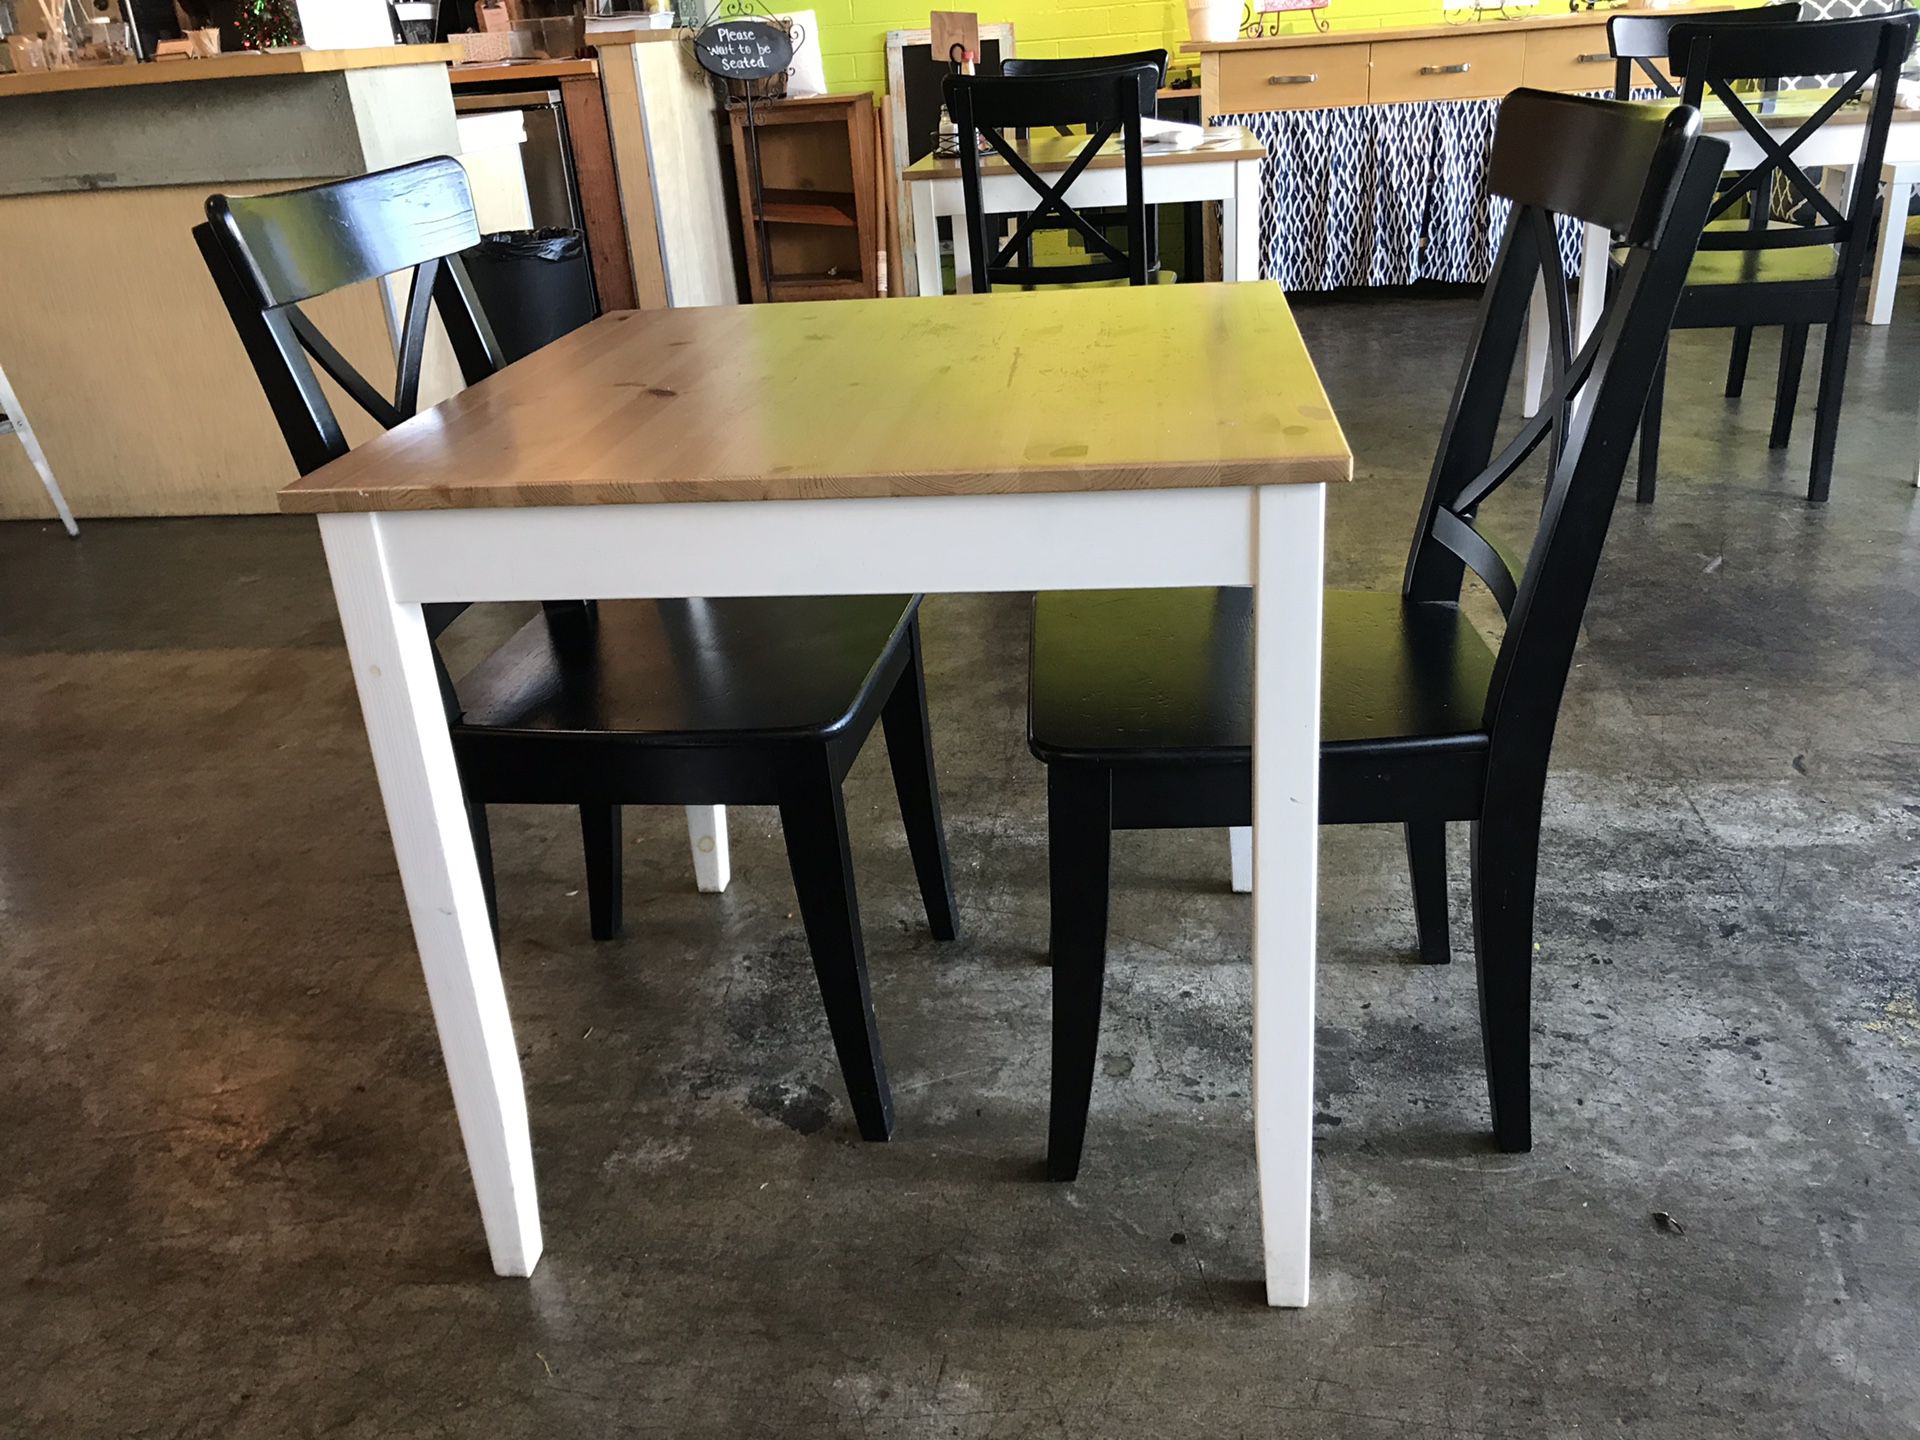 Wood Table + 2 chairs